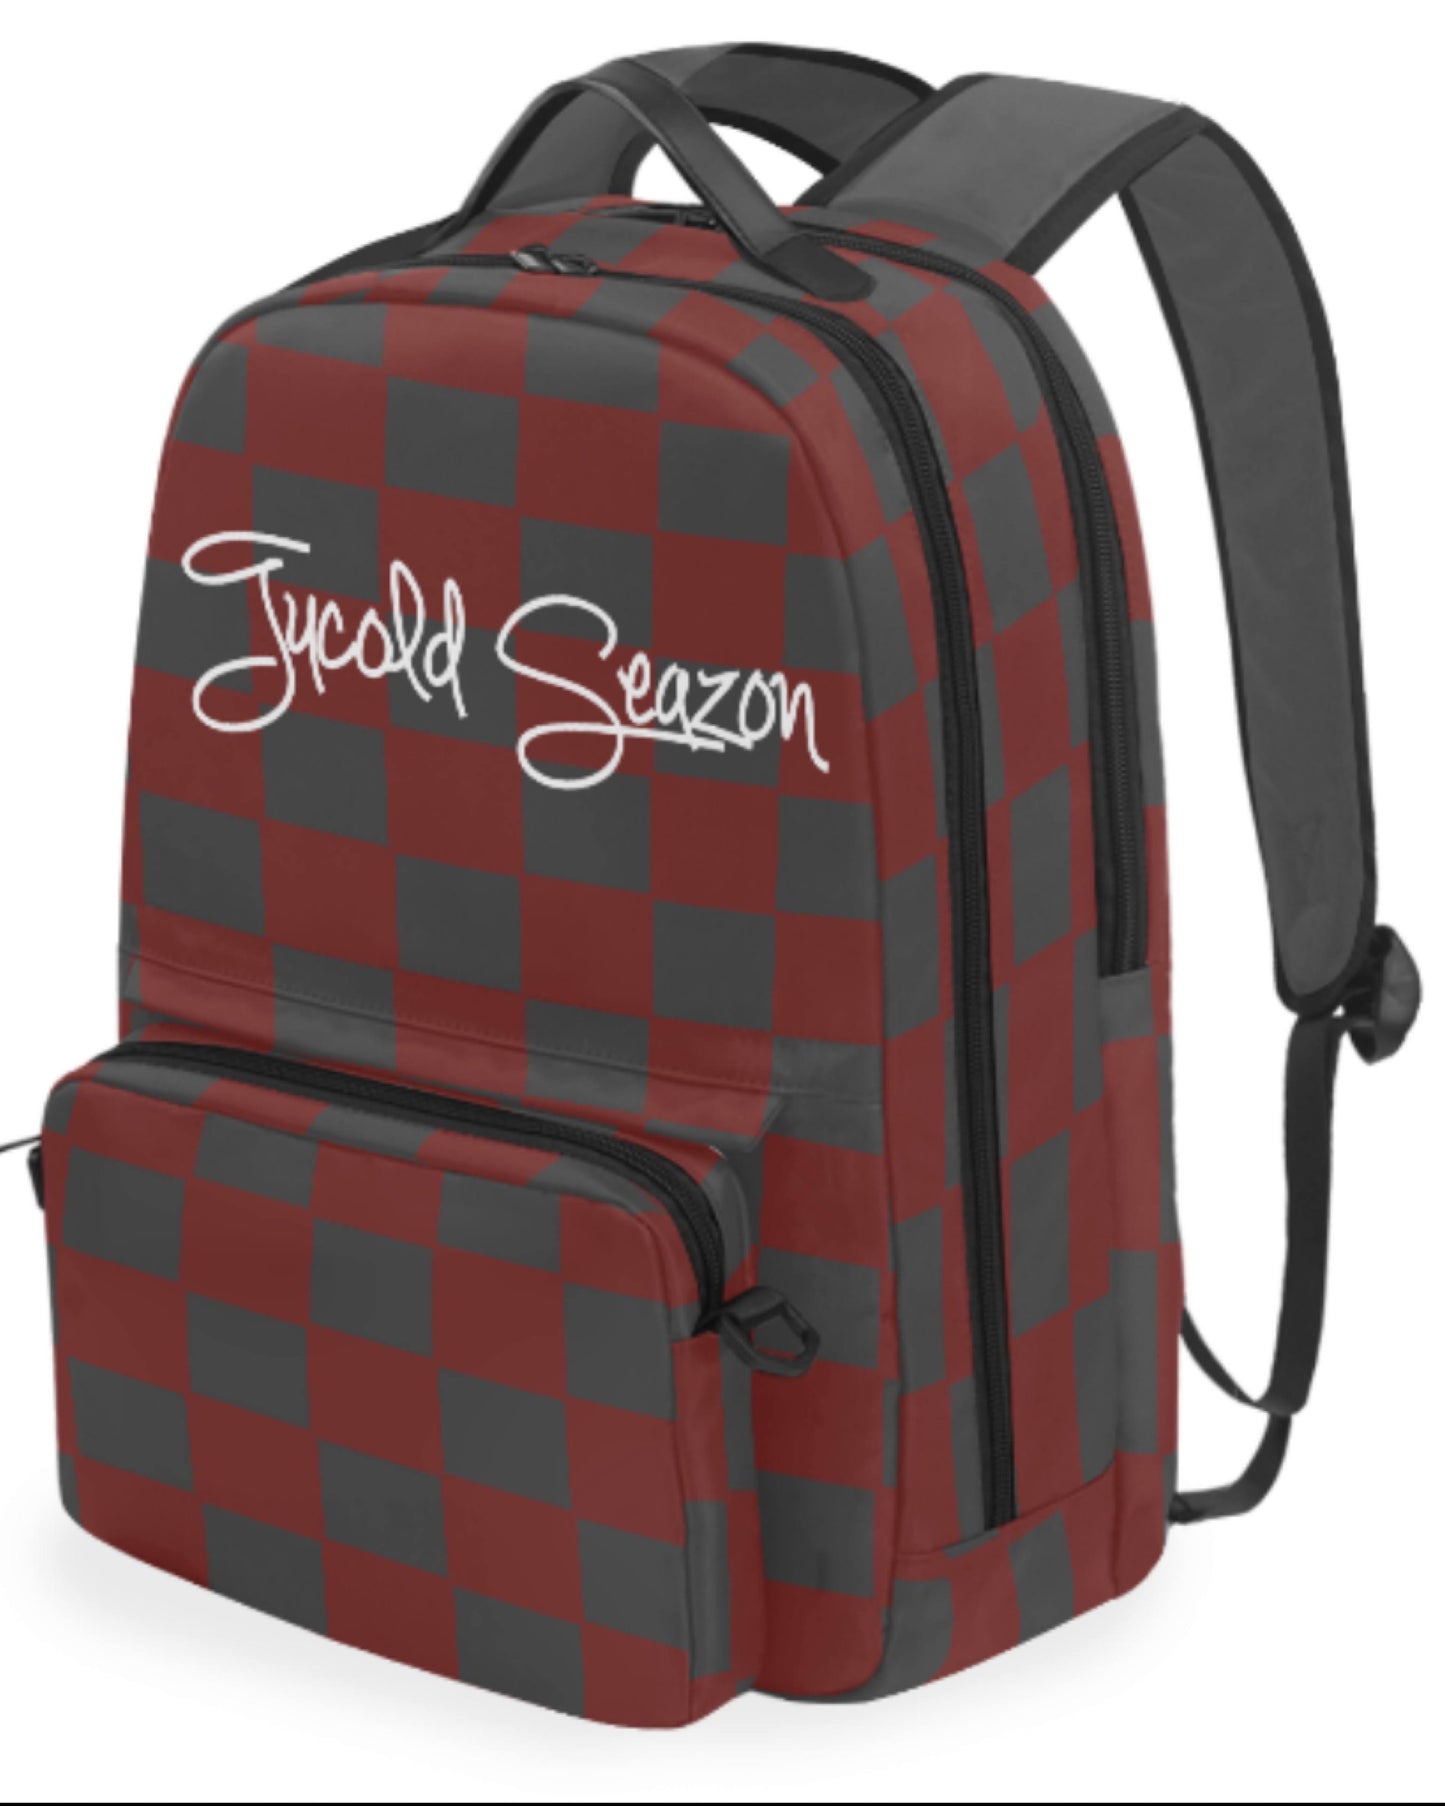 Tucold Seazon Checkered Original Backpack